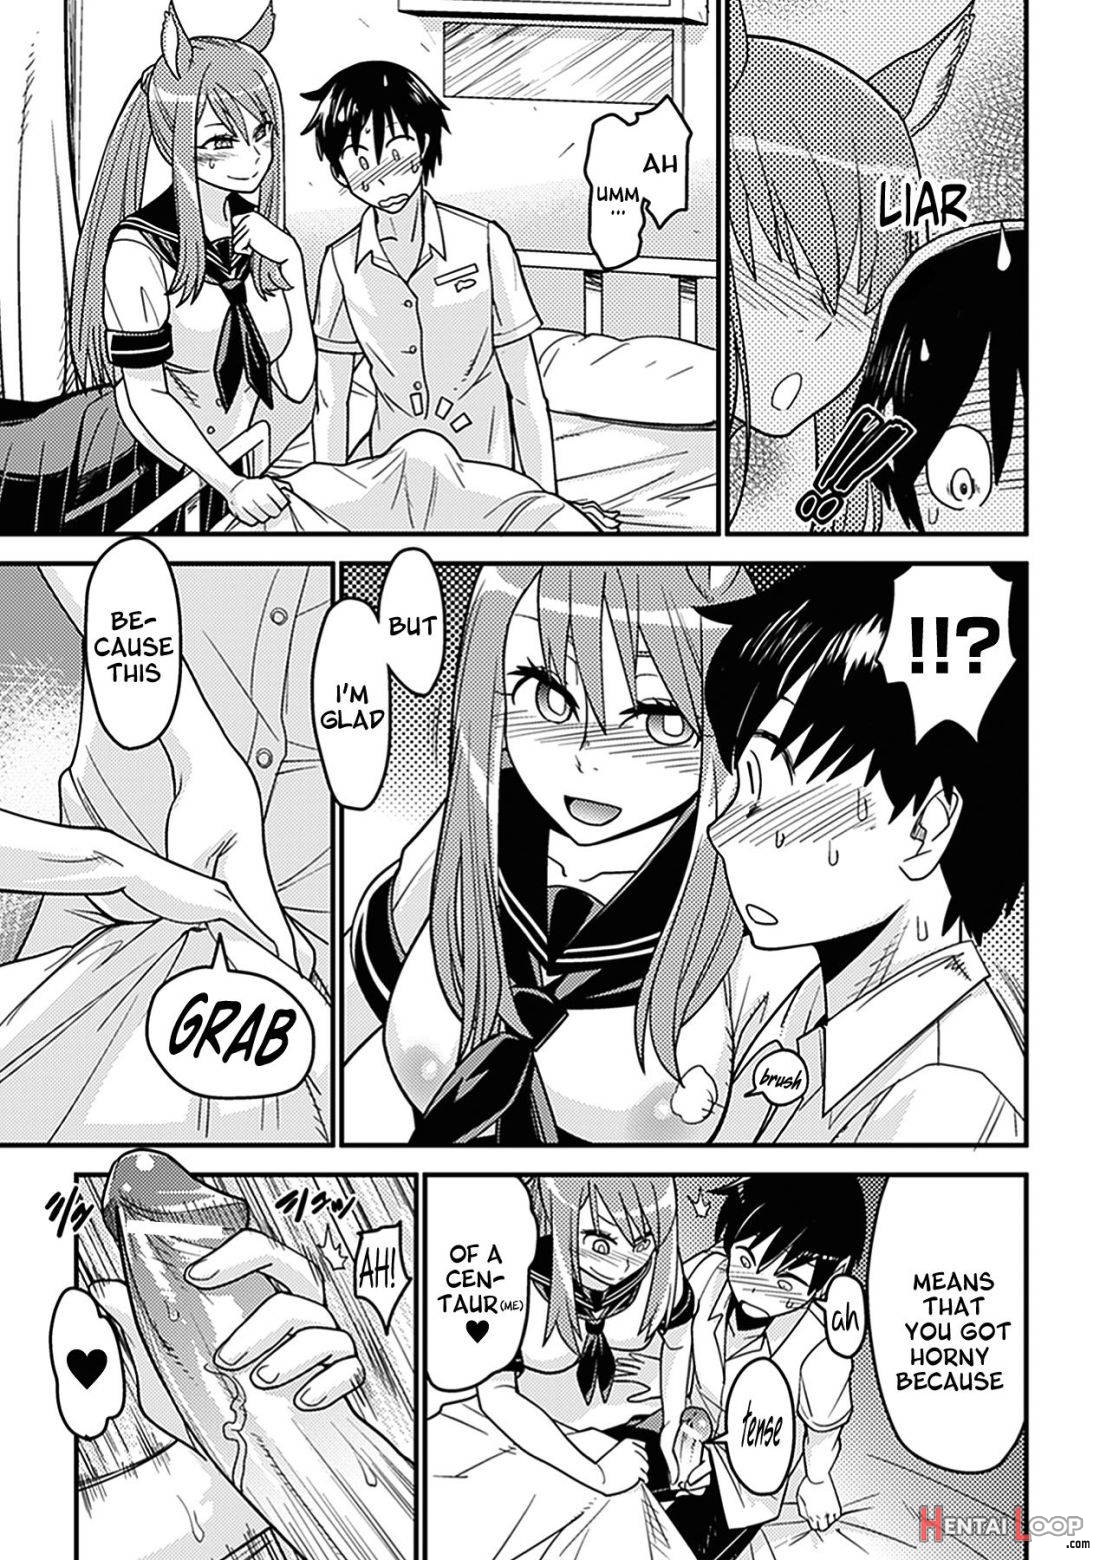 Bessatsu Comic Unreal Monster Musume Paradise Vol. 2 page 8